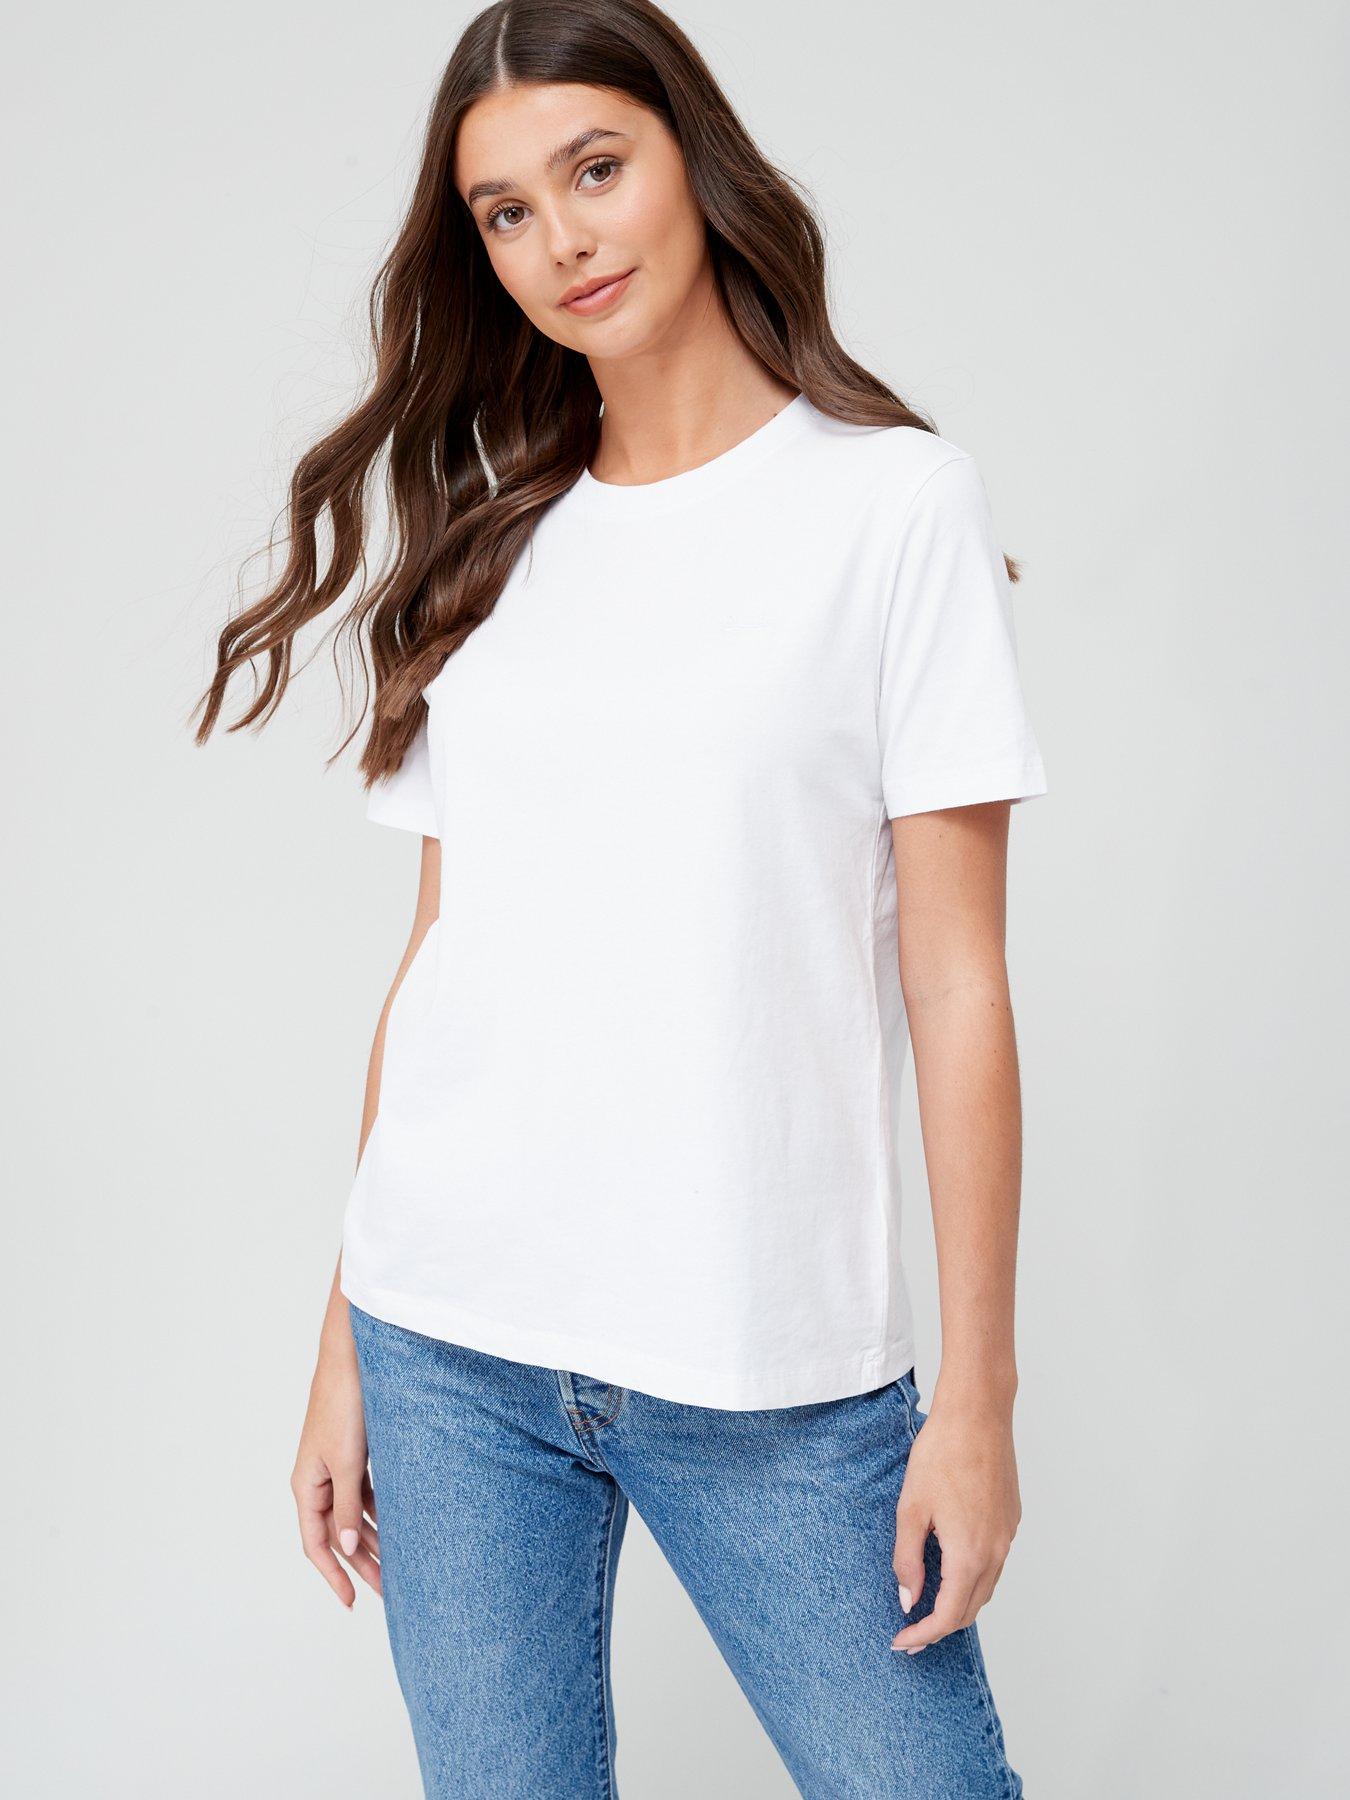 Superdry T-Shirts | Superdry Womens T-Shirts Very.co.uk